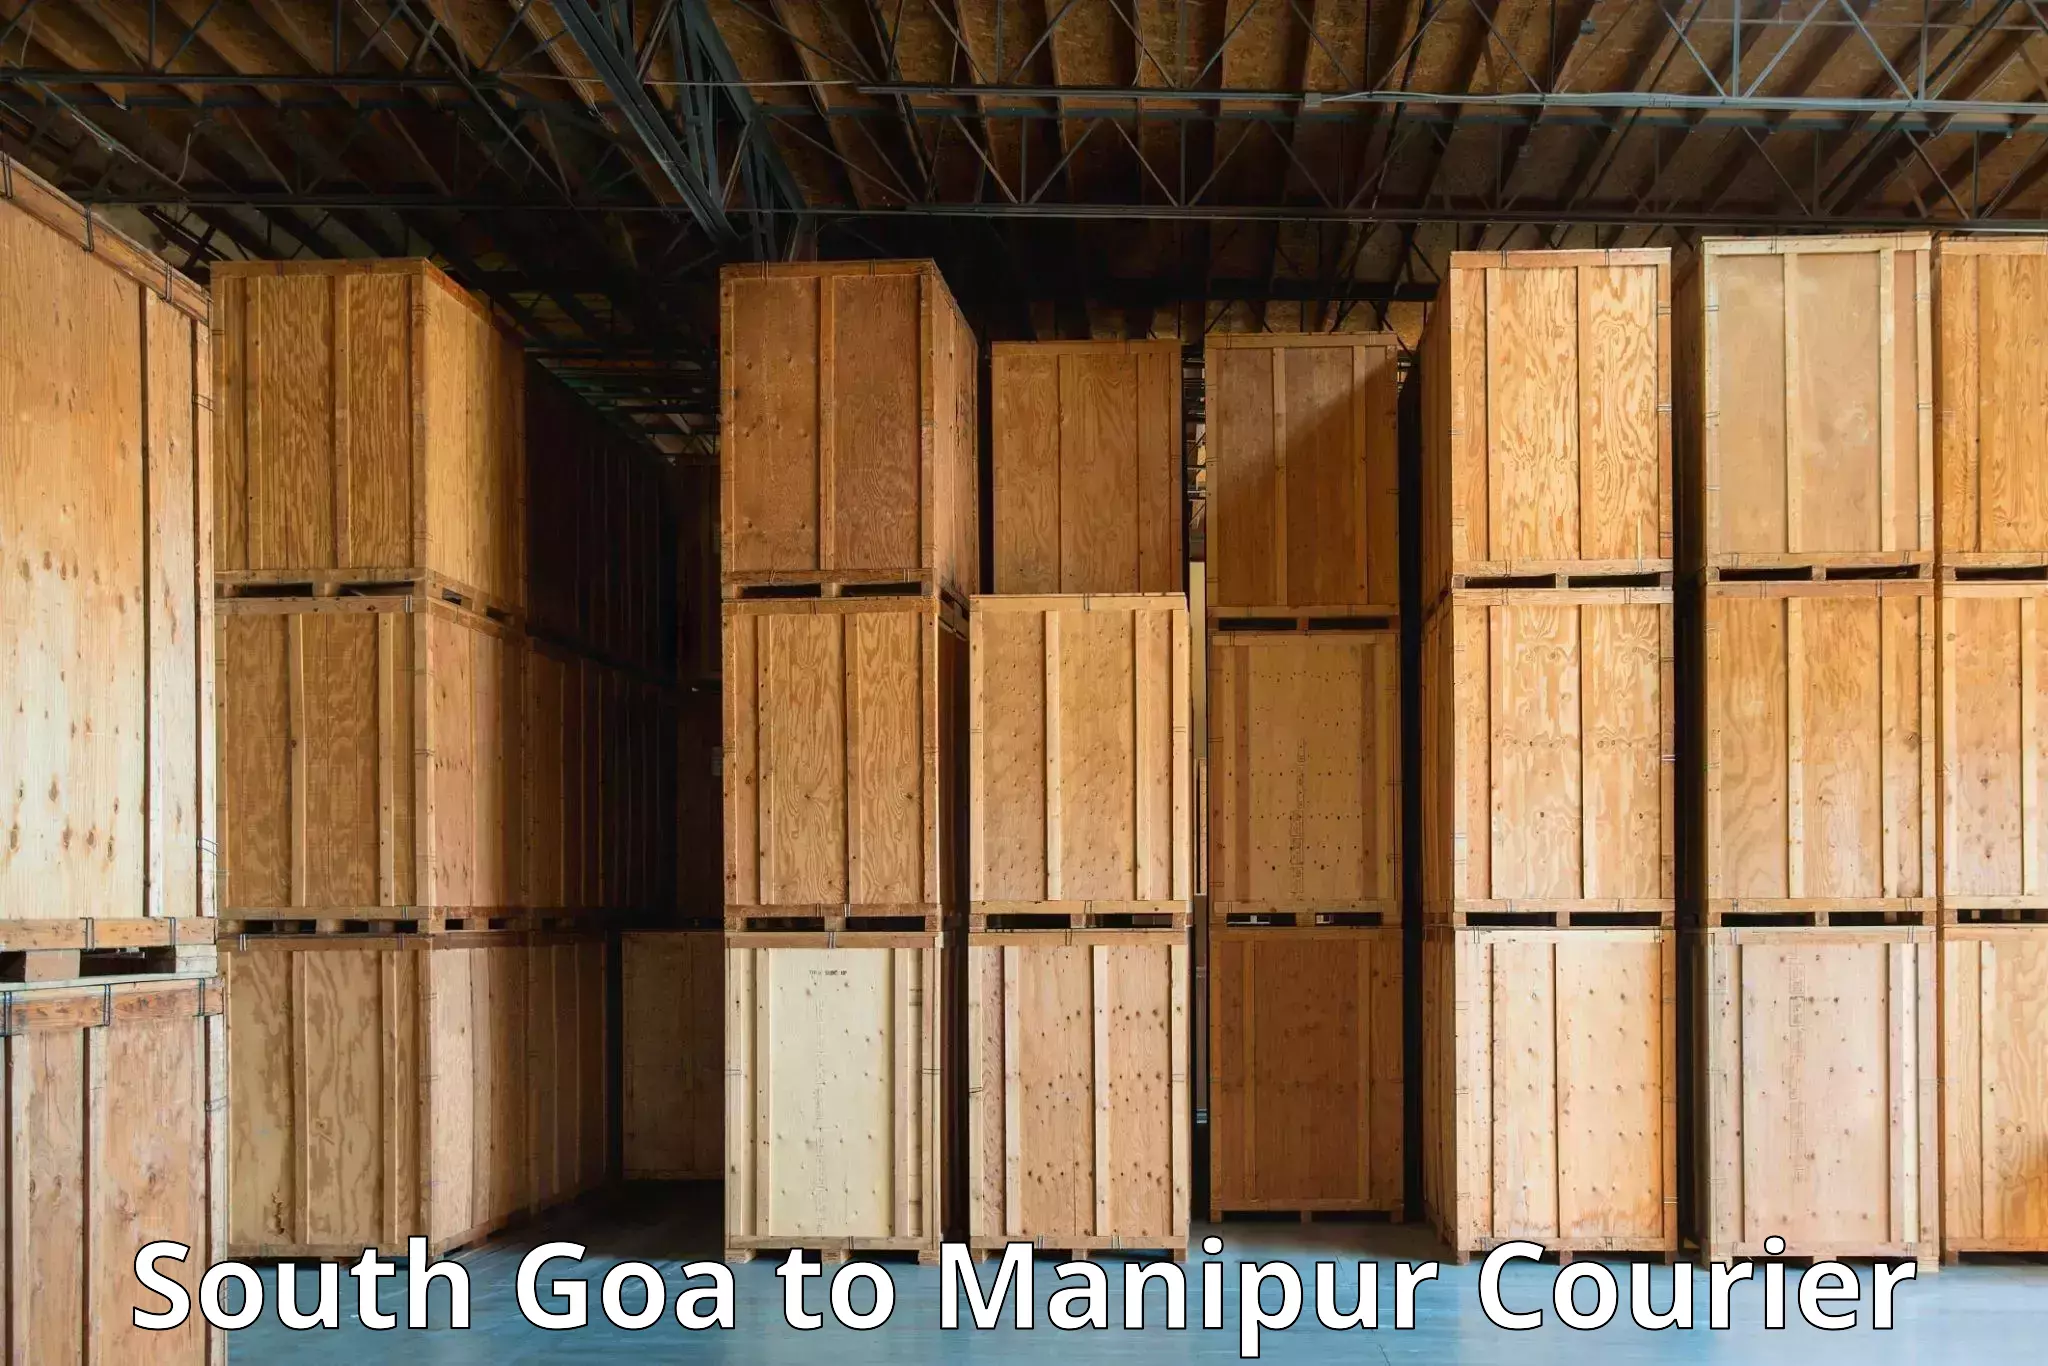 Local courier options South Goa to Manipur